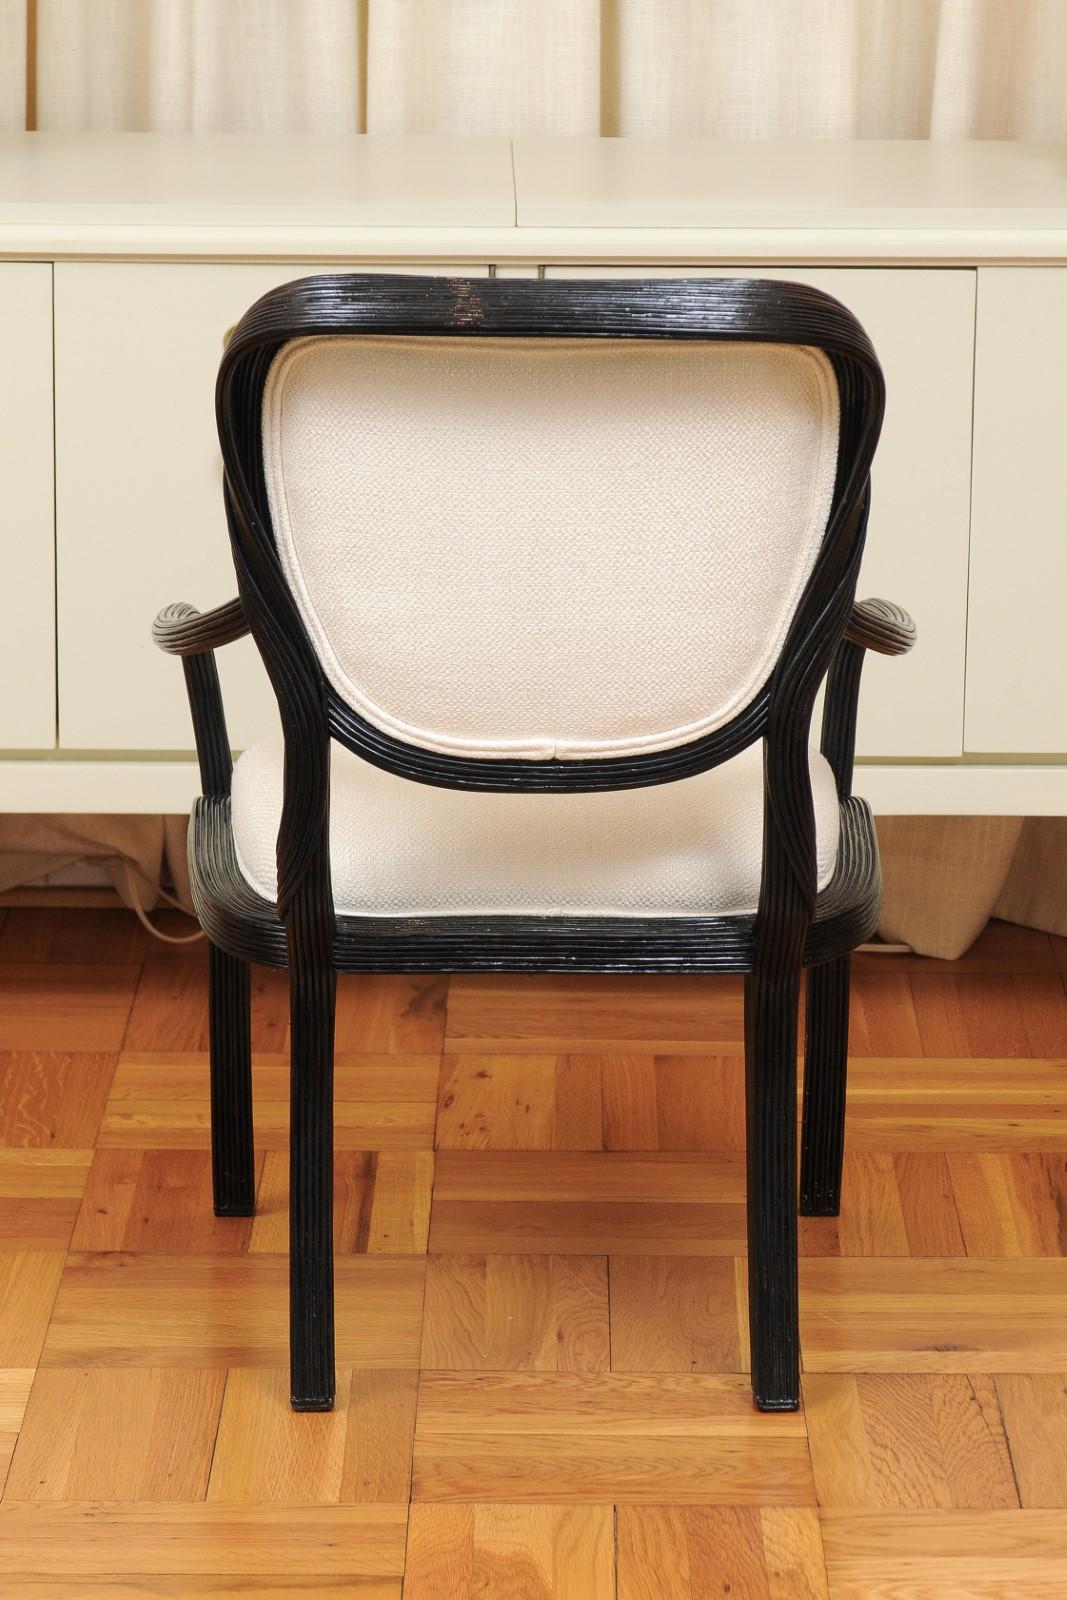 Extraordinary Set of 14 Trompe L'oiel Arm Dining Chairs by Cobonpue, circa 1980 For Sale 9